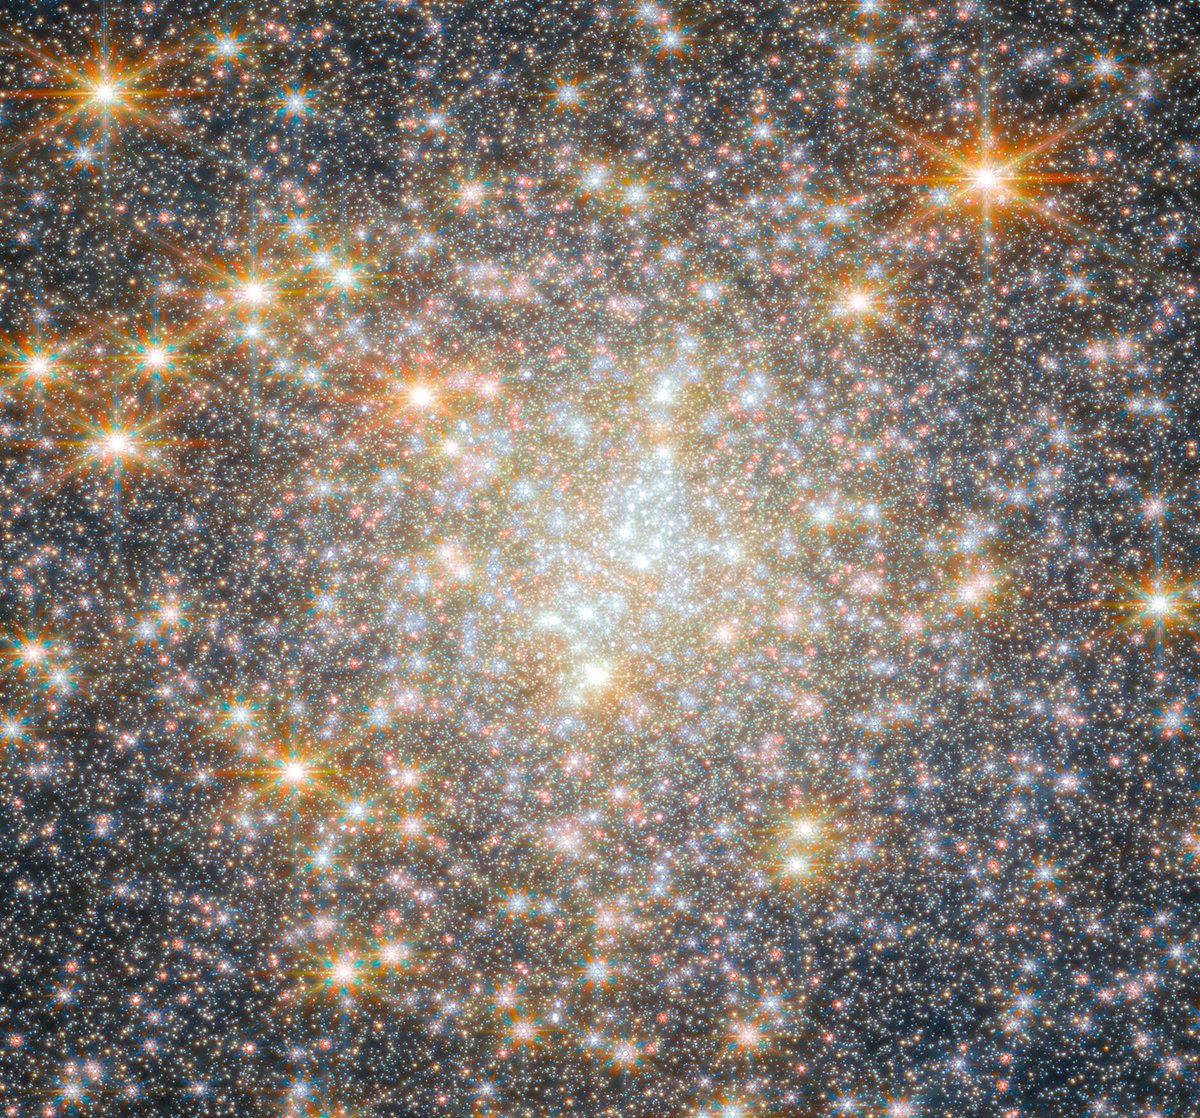 JWST revisited a globular cluster, 238 years after it discovered